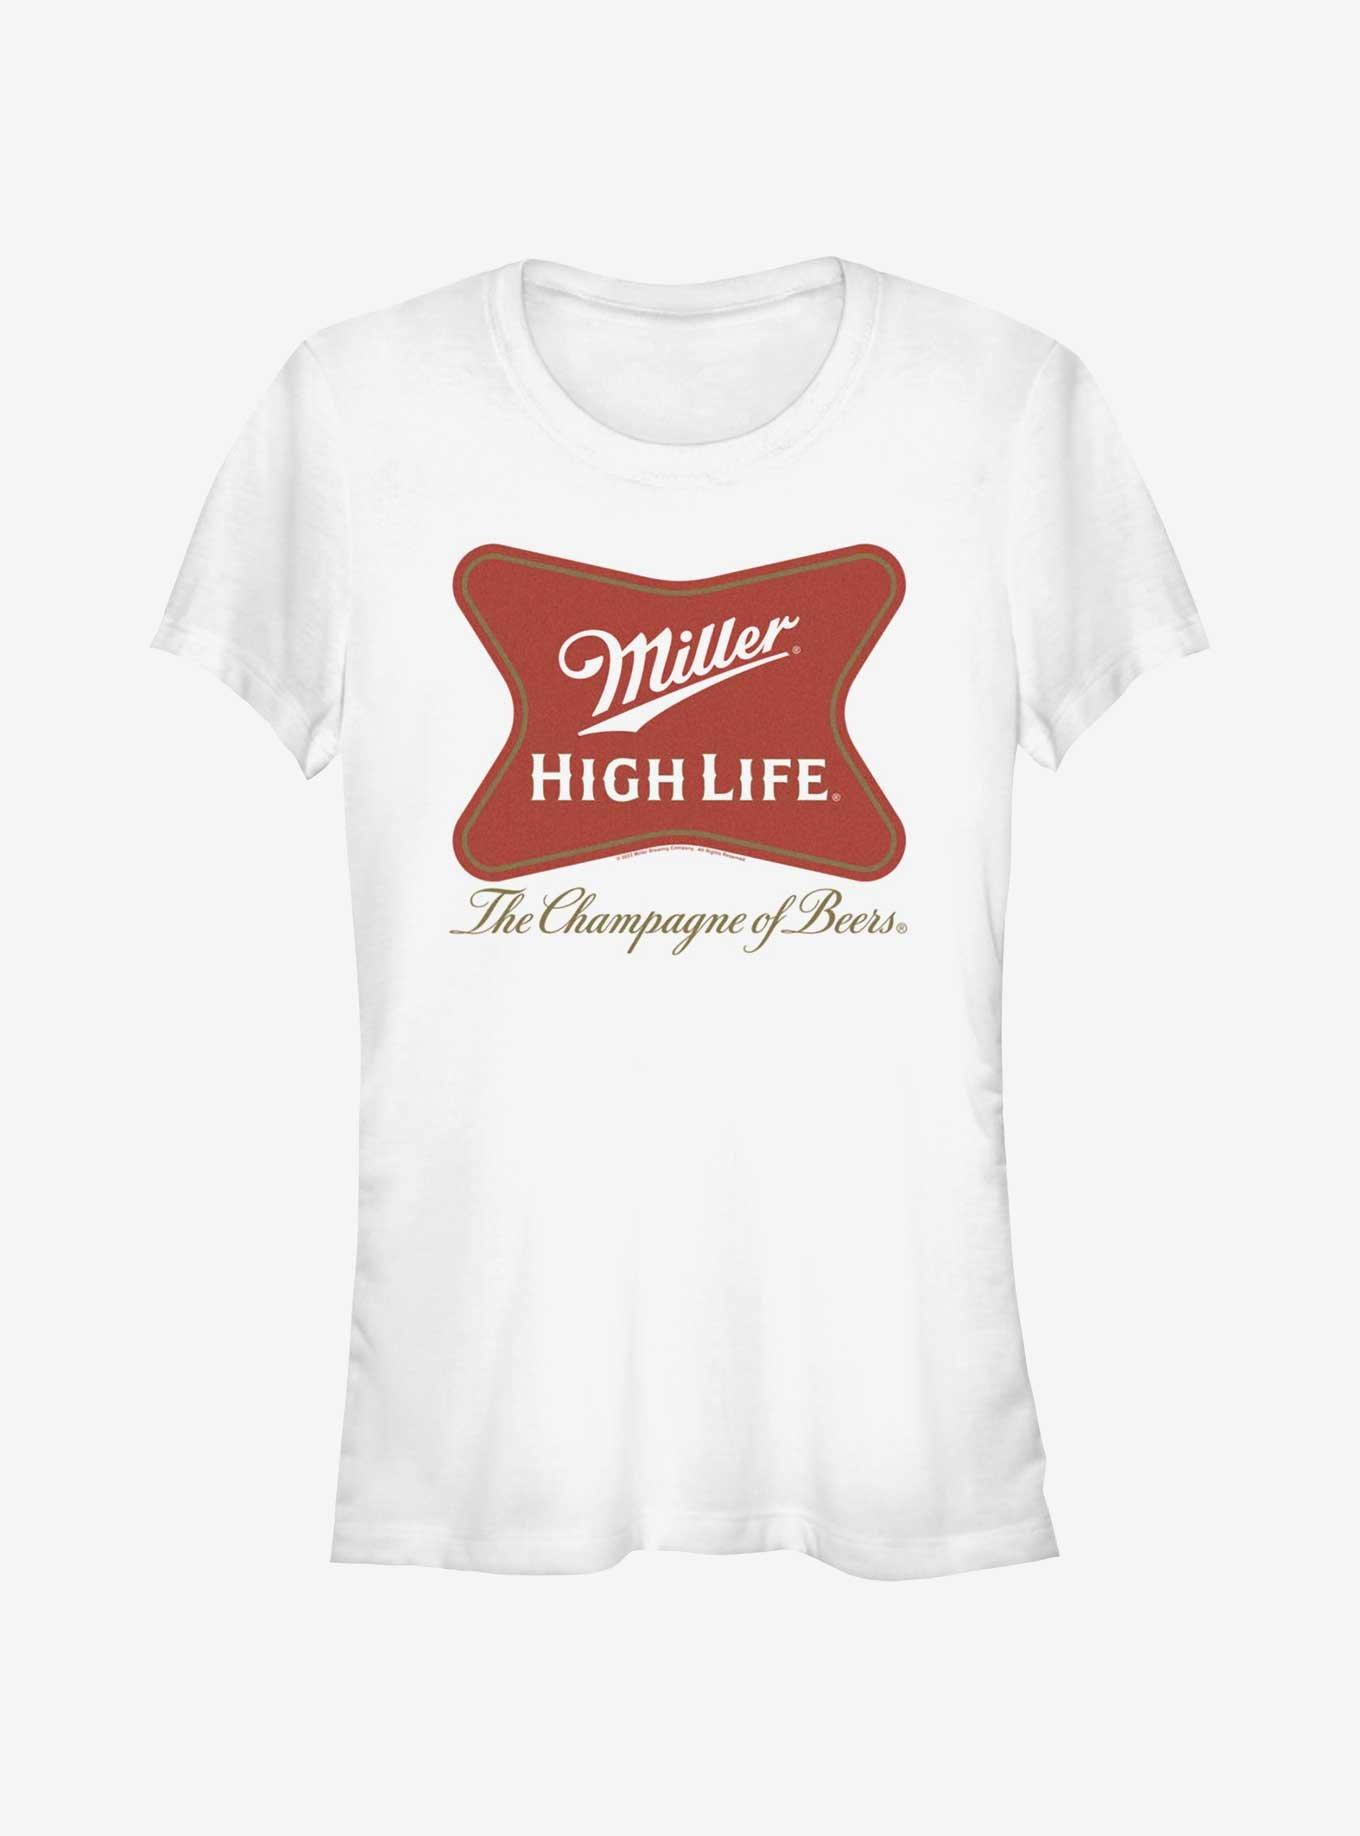 Miller Brewing Company The Champagne of Beer Girls T-Shirt, , hi-res